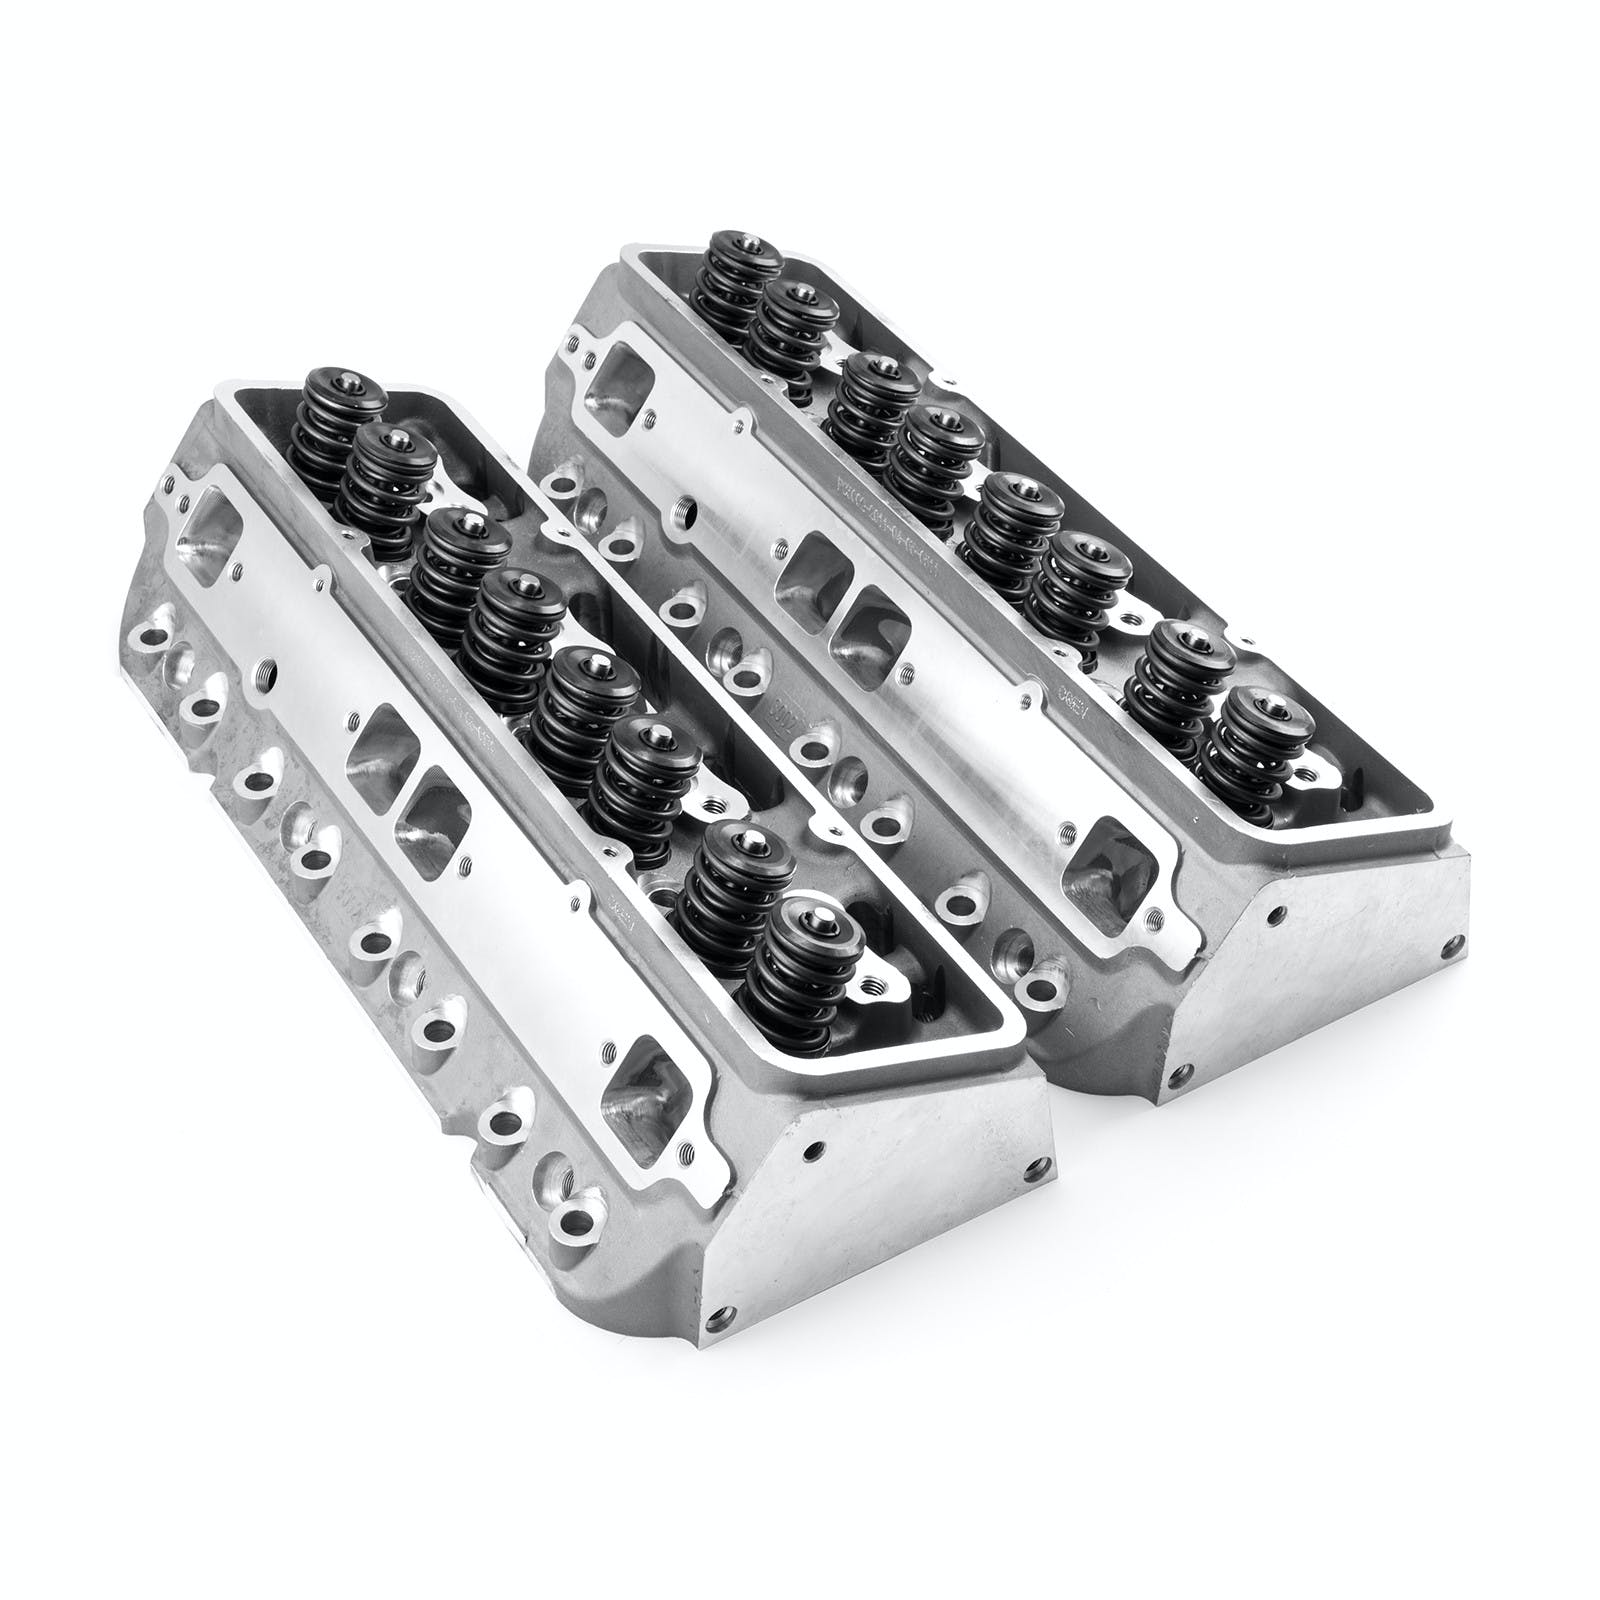 Speedmaster PCE281.2018 217cc 70cc Angle CNC Solid-R Complete Aluminum Cylinder Heads